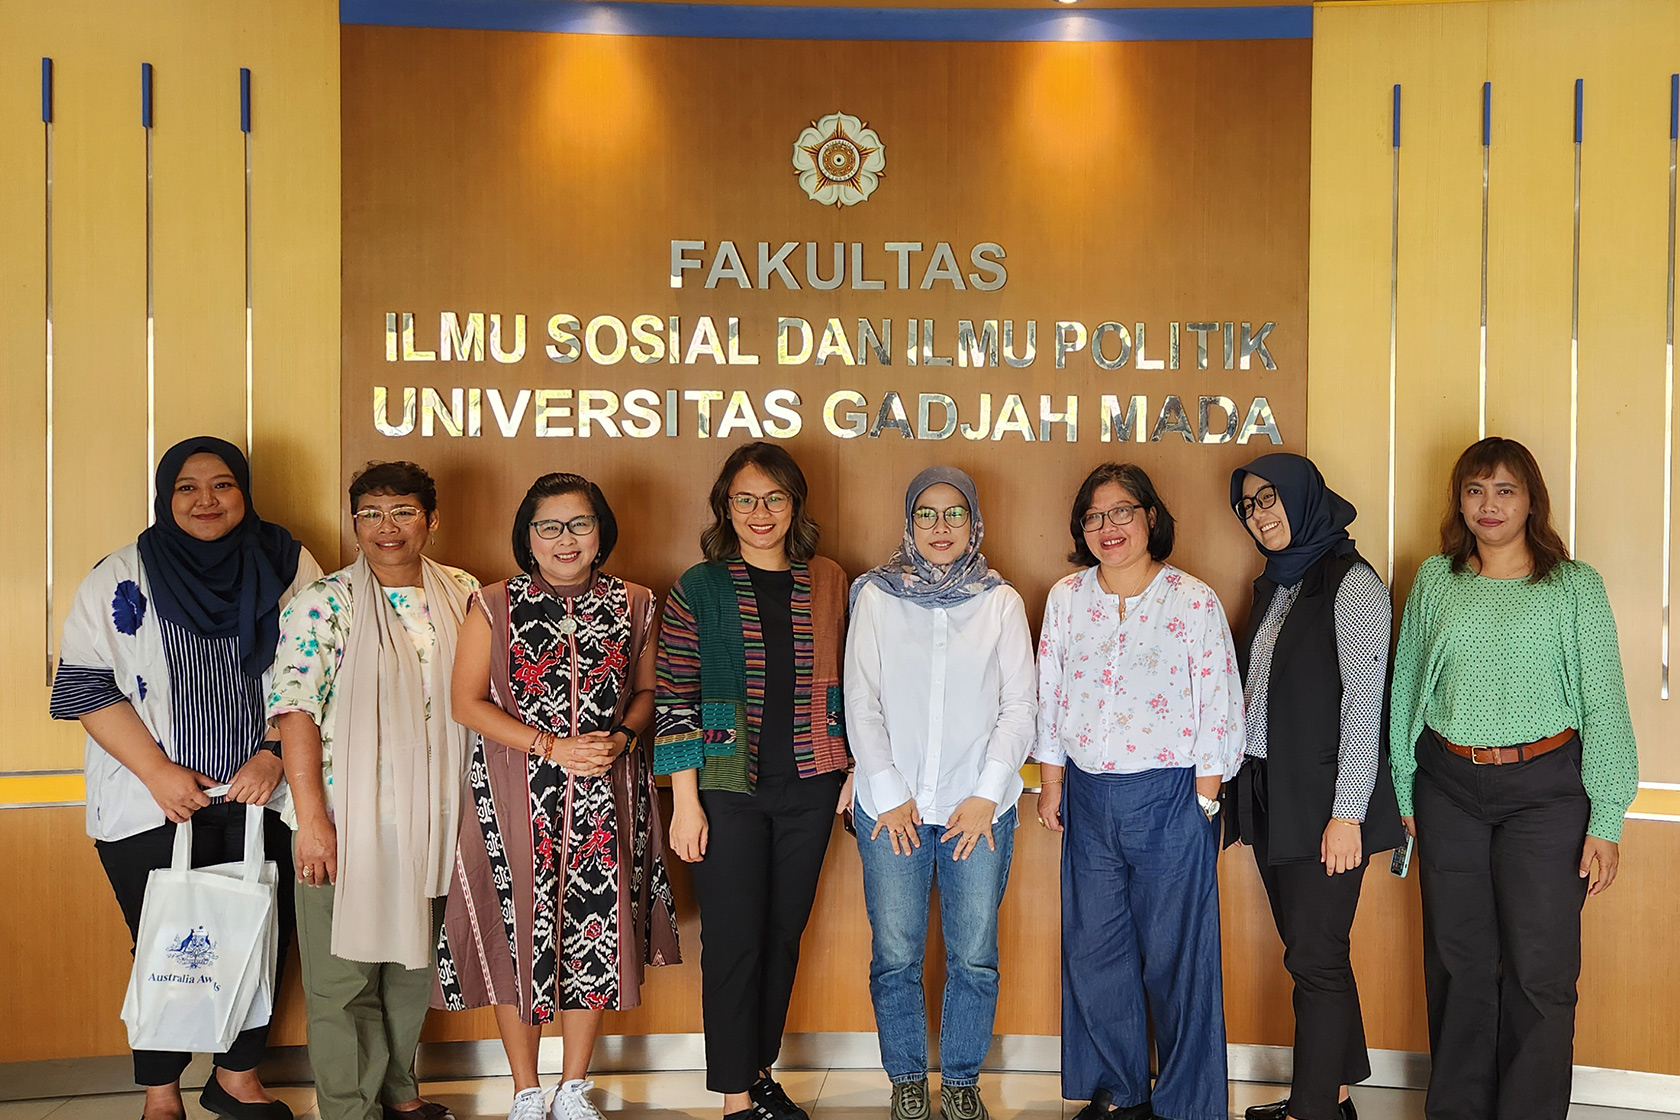 A group photo in front of the Faculty of Social Science and Political Science Universitas Gajah Mada.